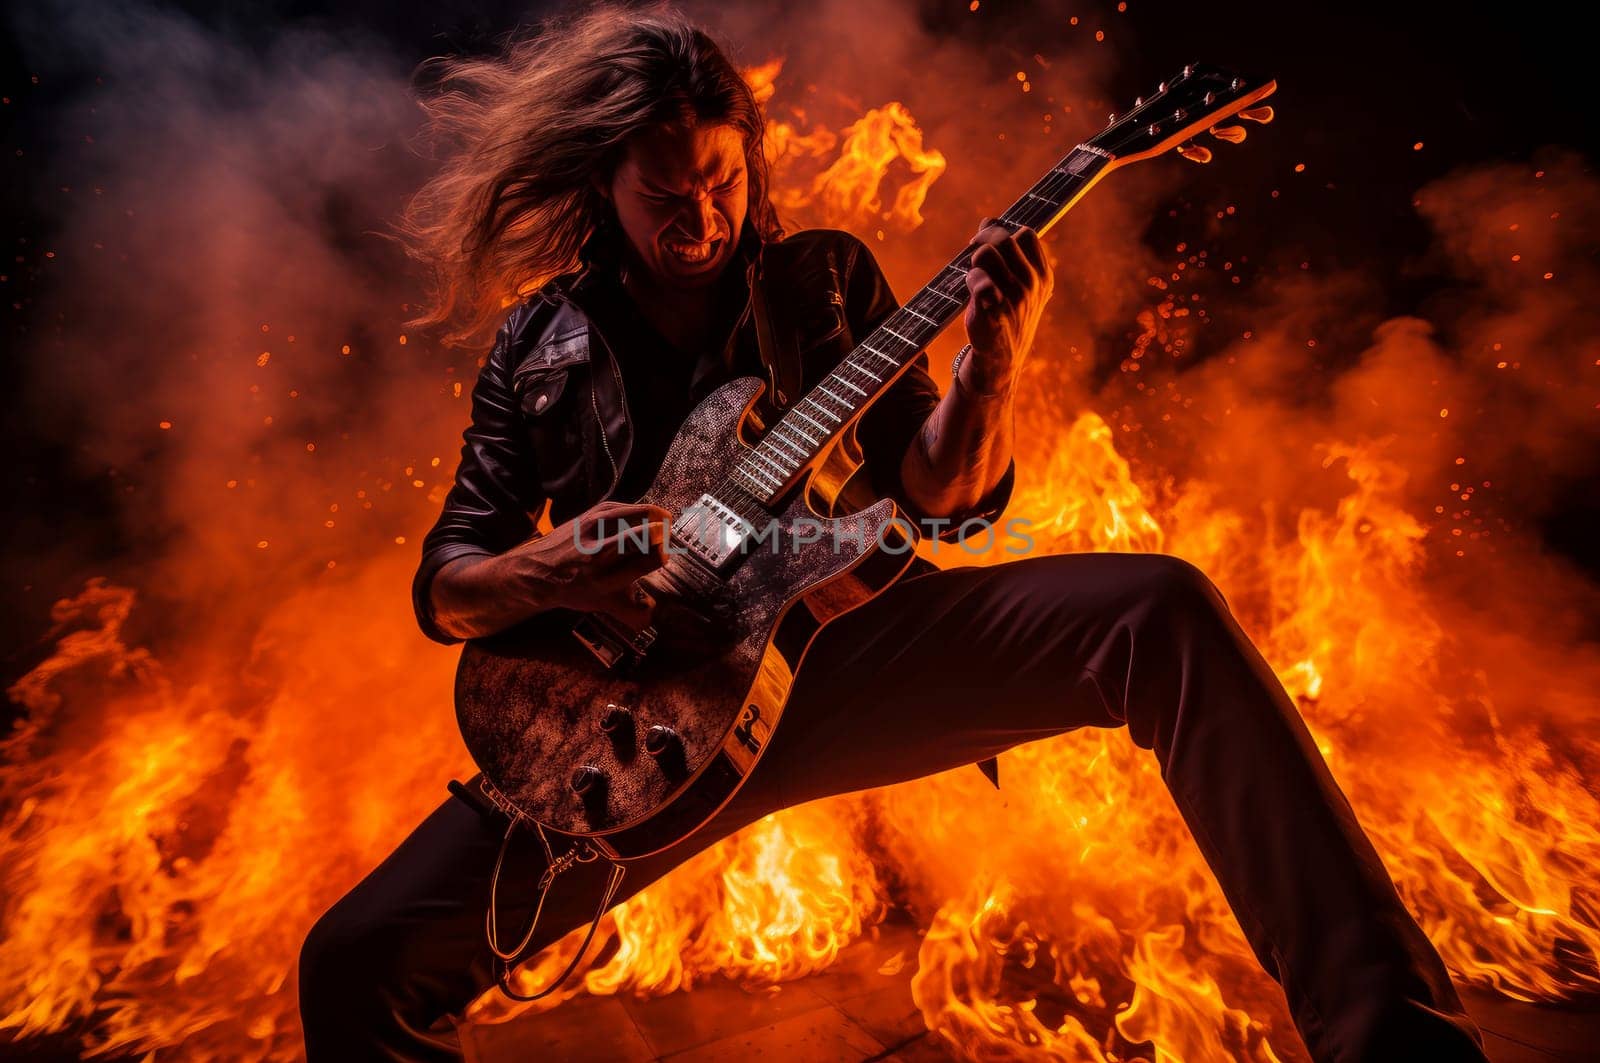 Dynamic Guitarist take on fire. Rock stage music by ylivdesign